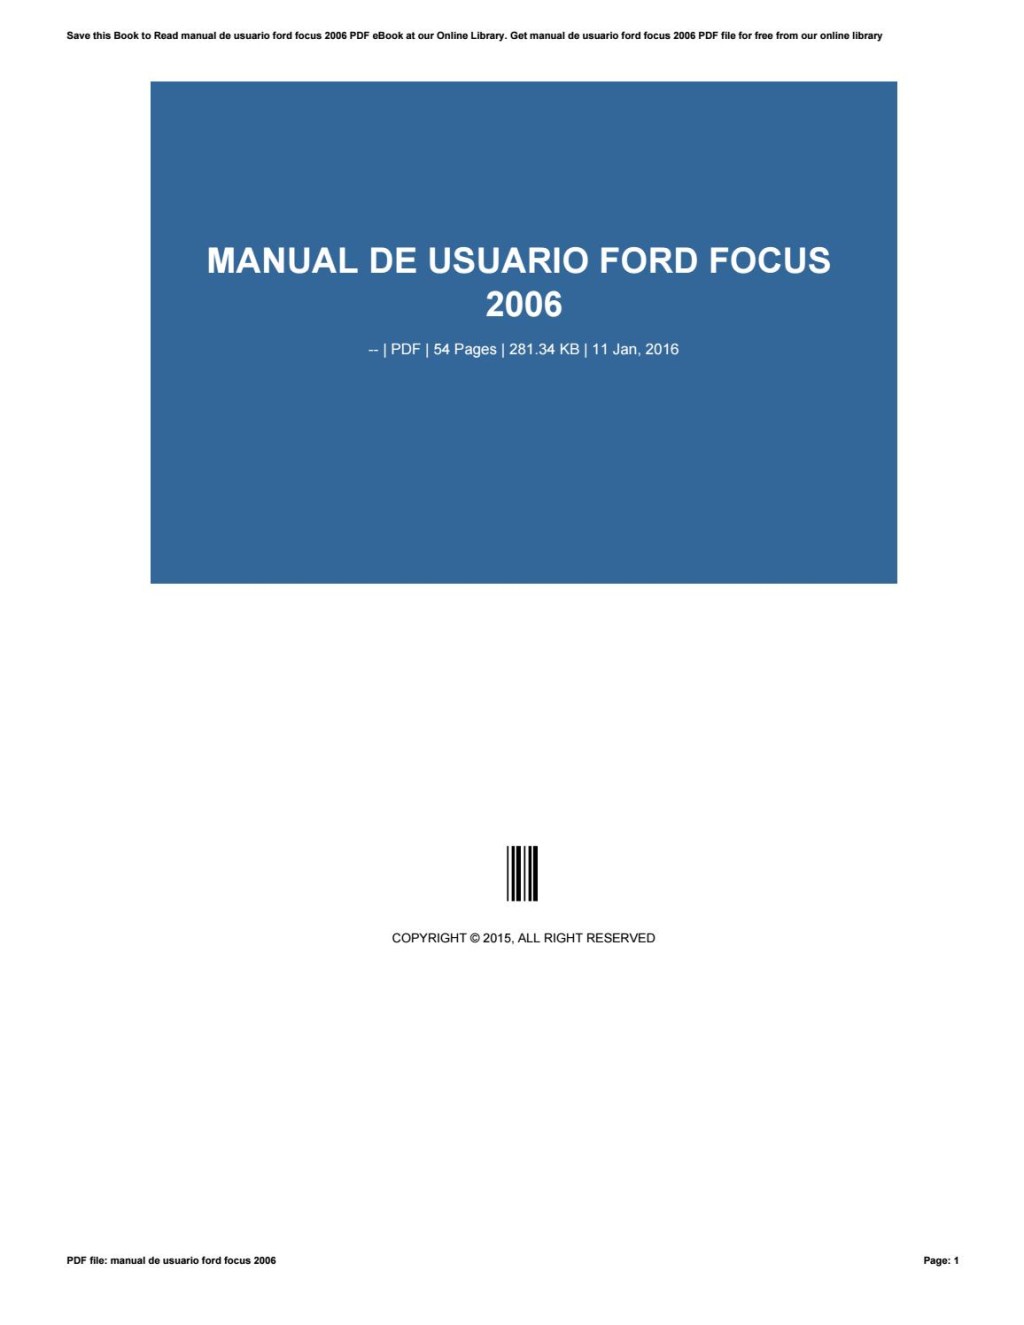 Picture of: Manual de usuario ford focus  by te – Issuu